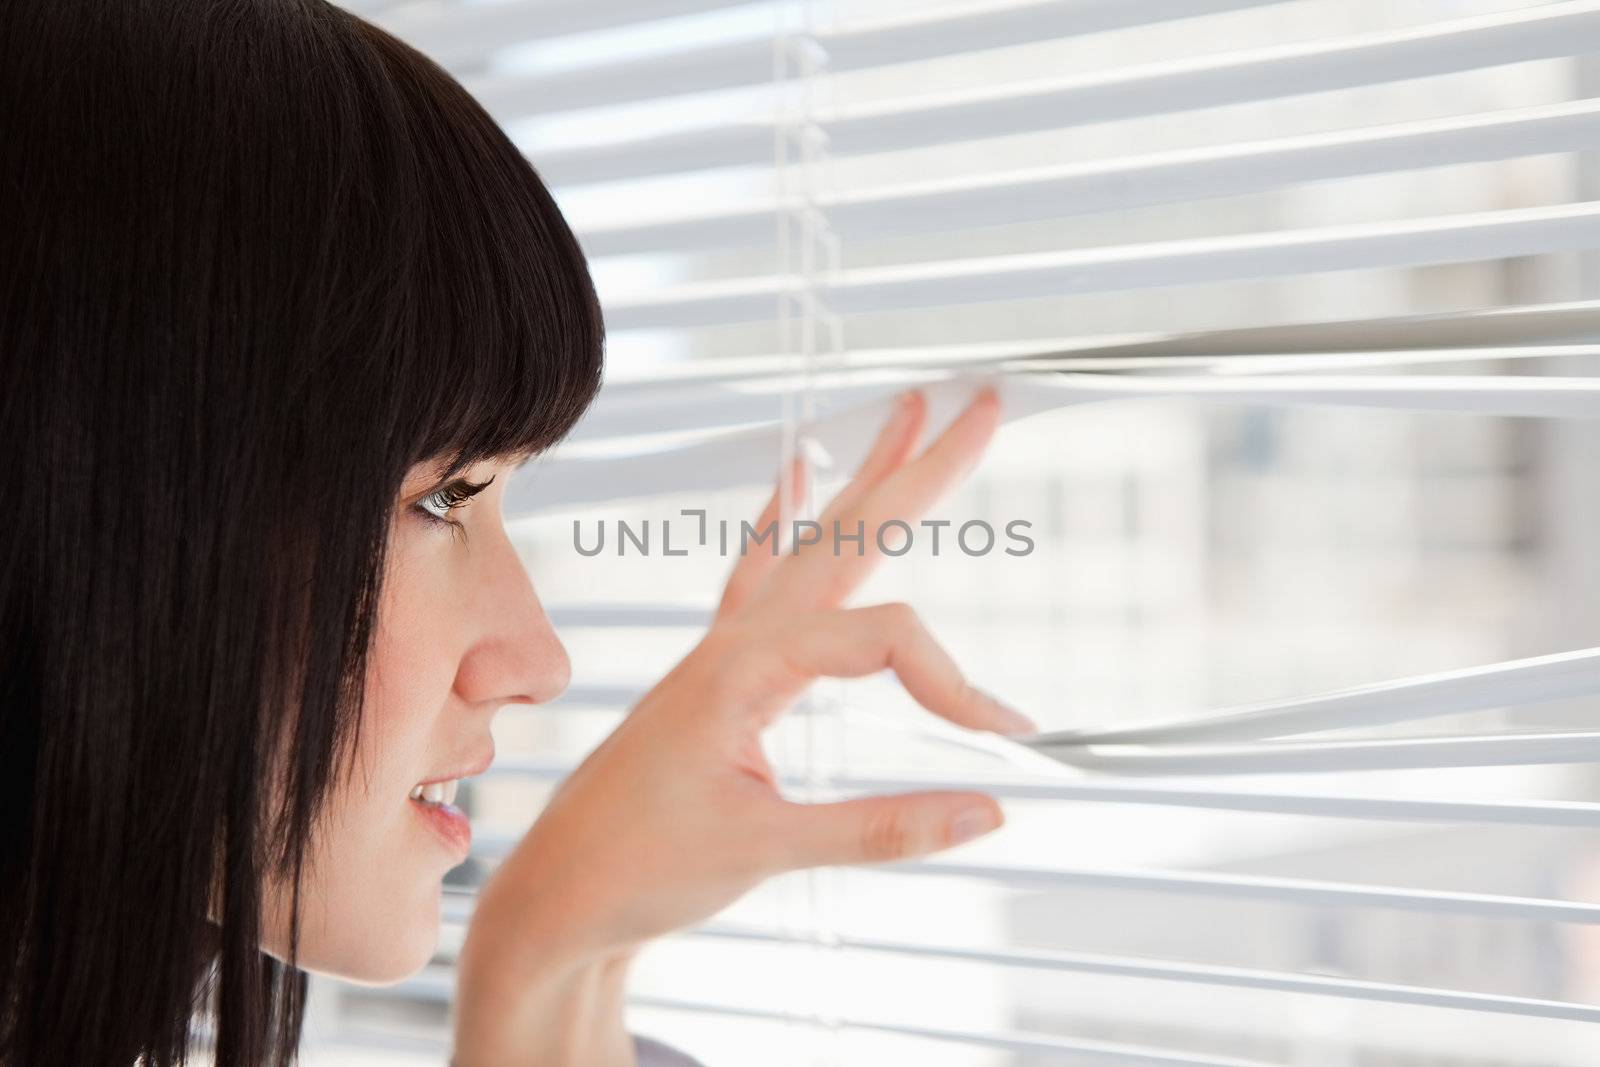 A young woman looking out through window blinds by Wavebreakmedia